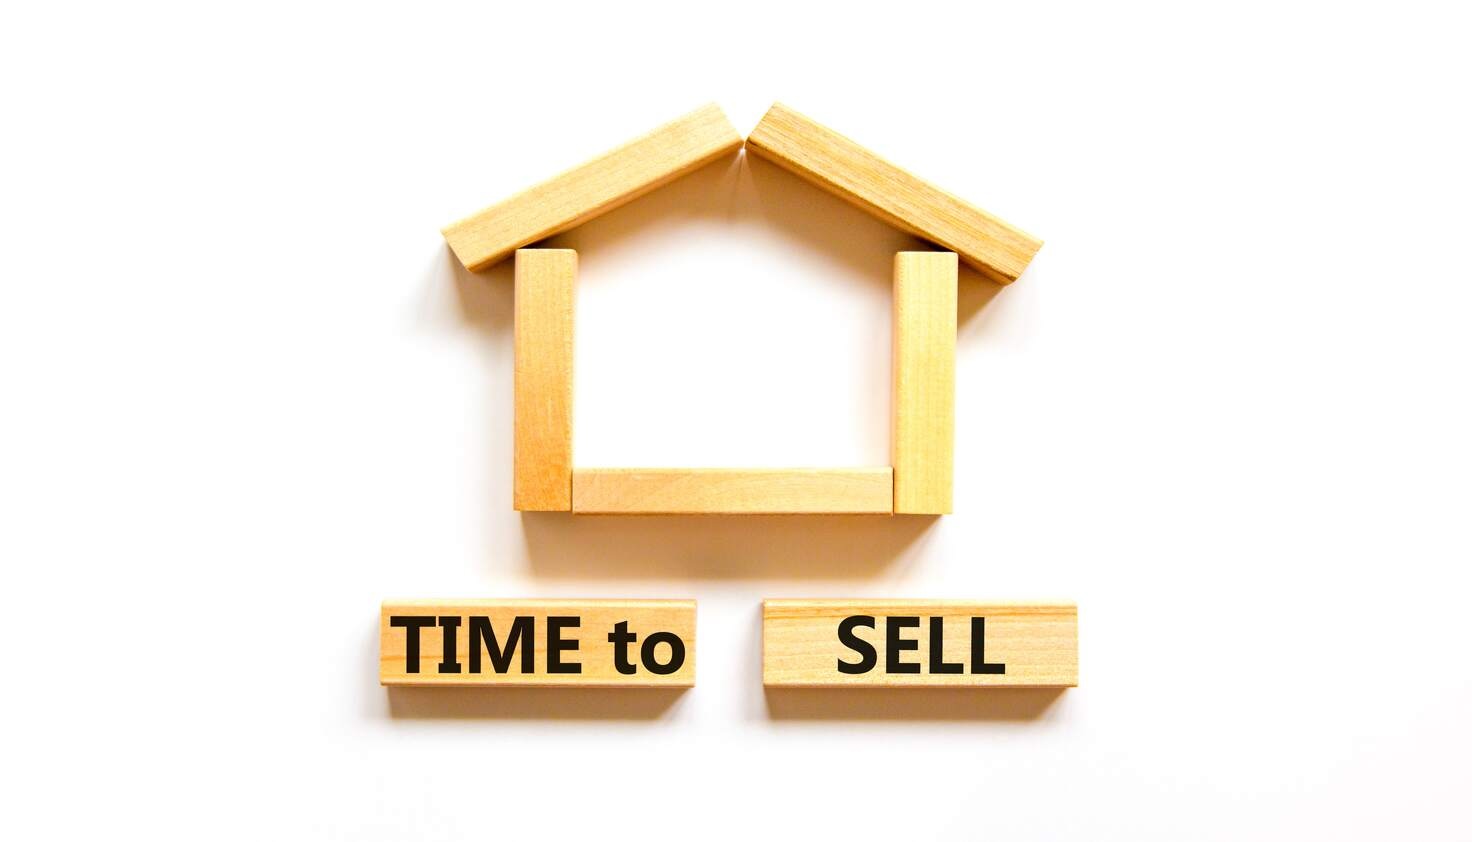 How long does it take to sell a house